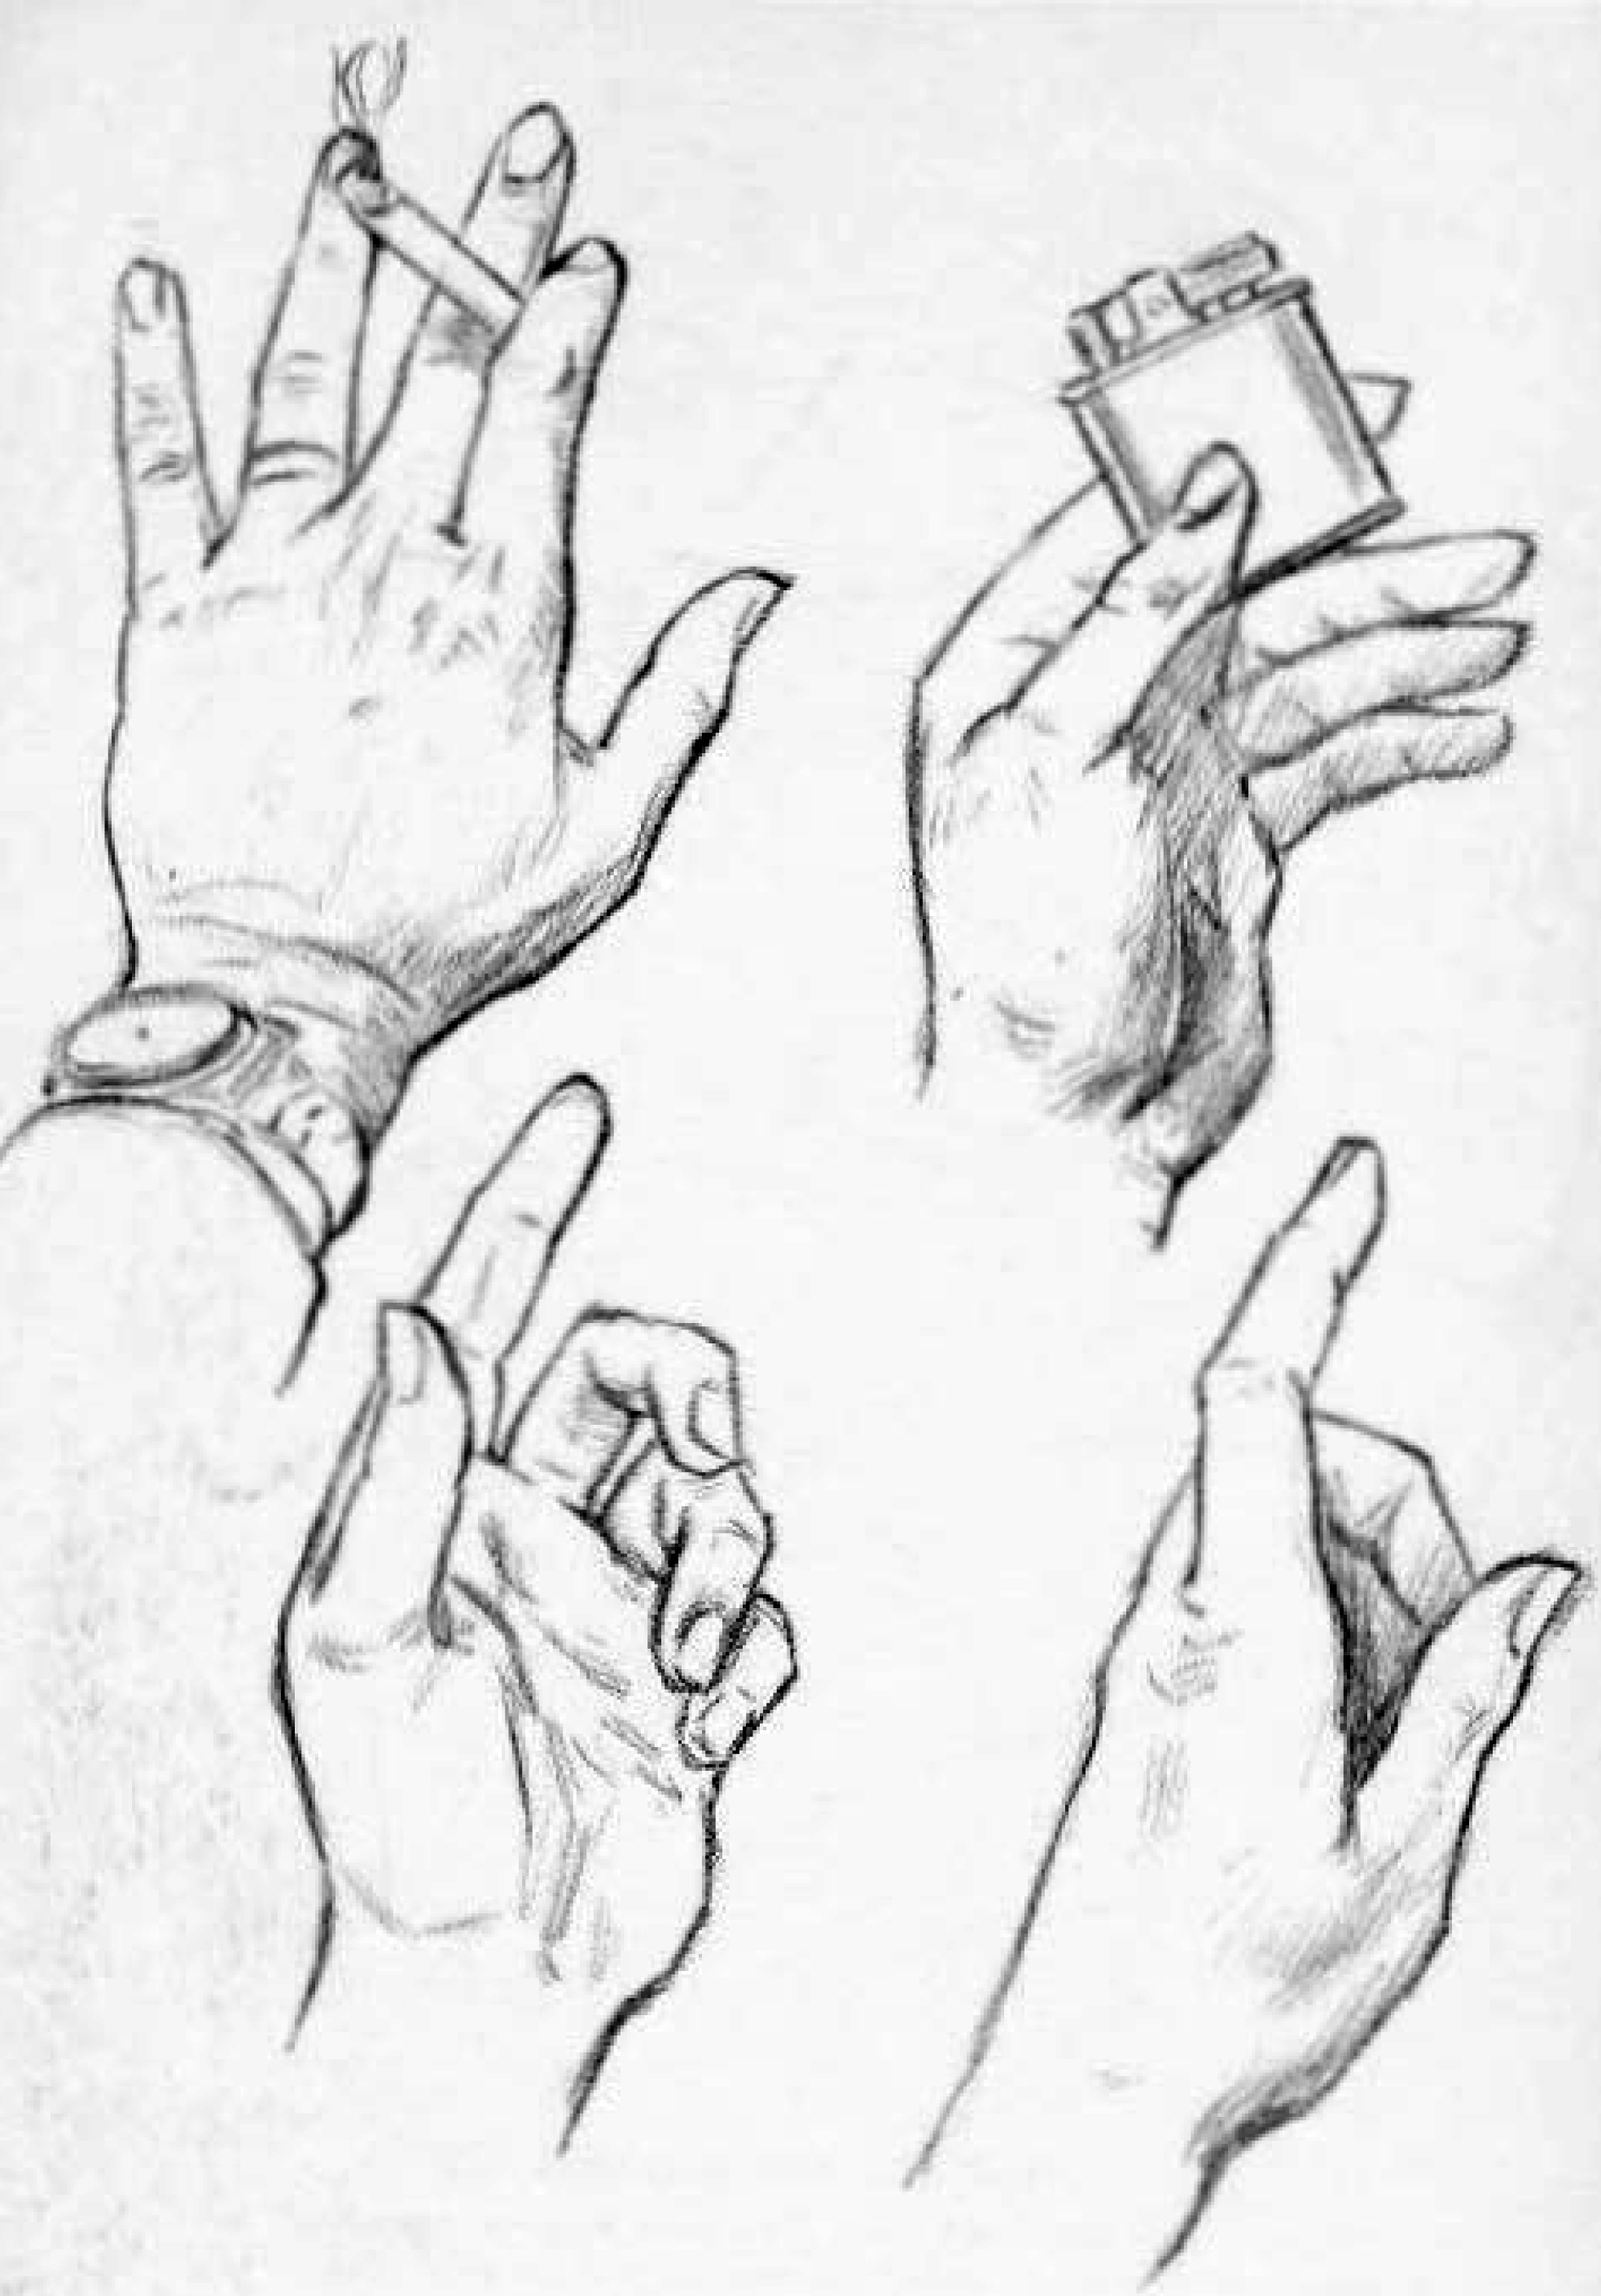 drawing your own hands for practice